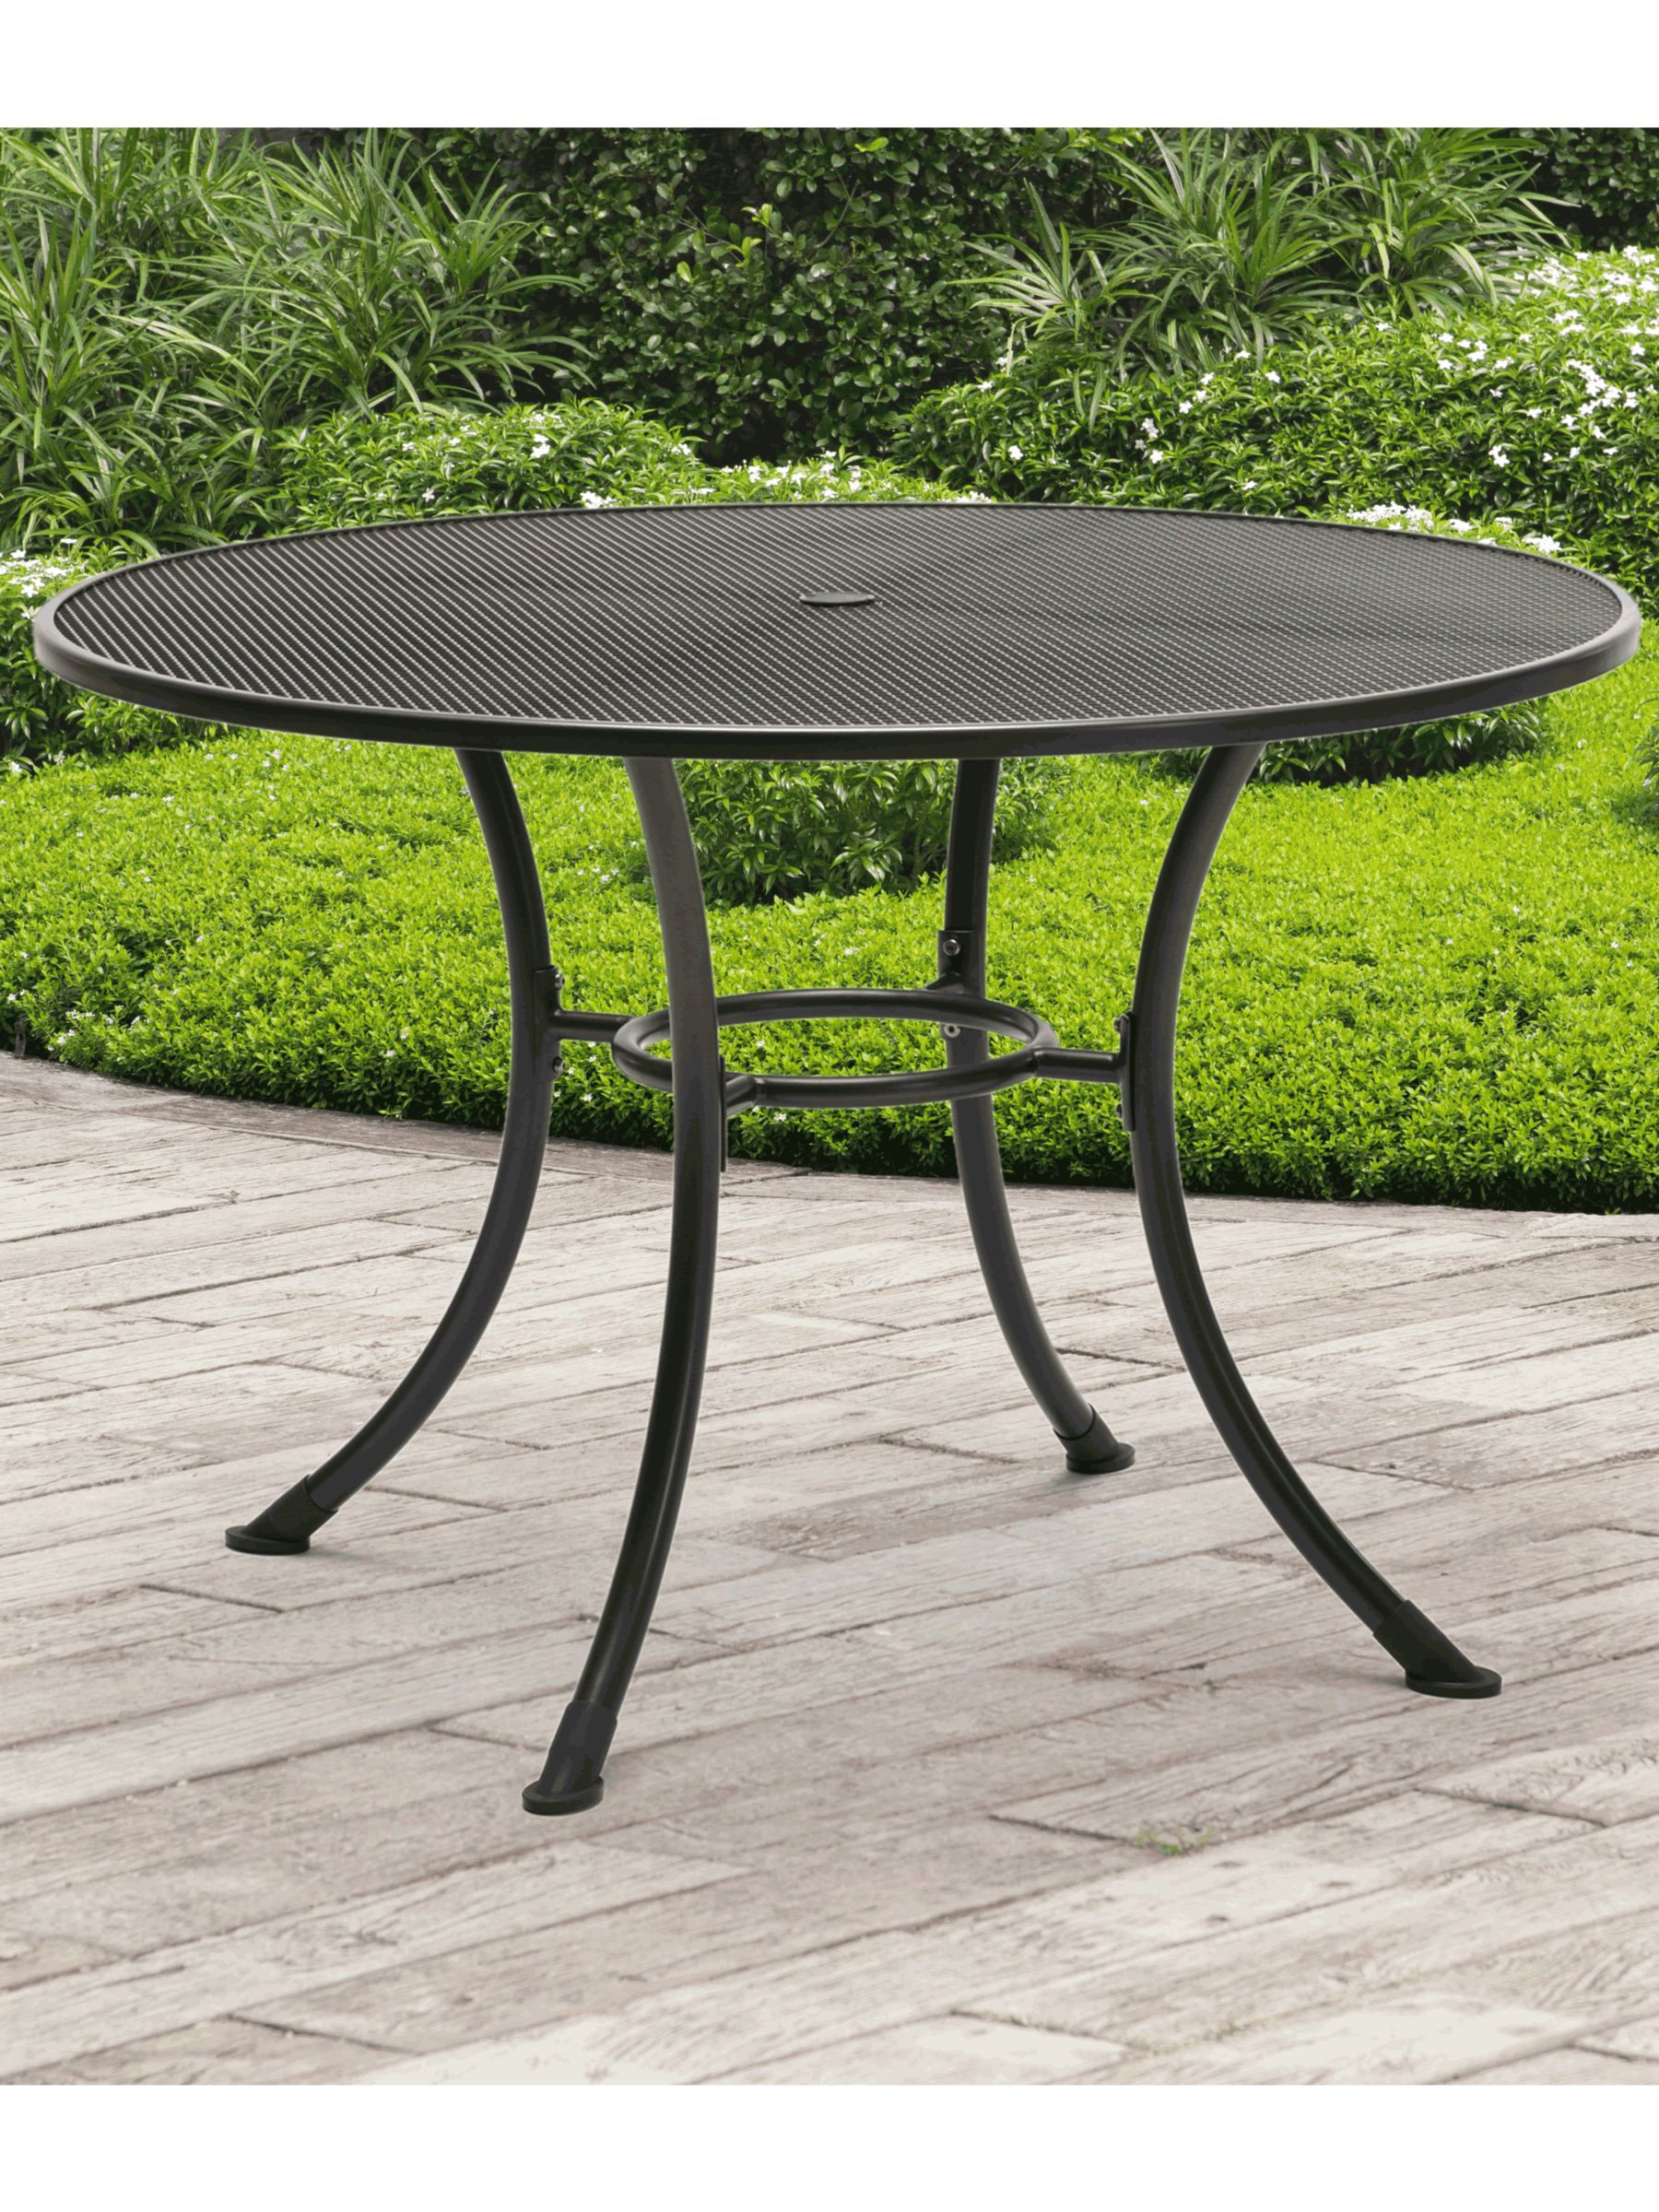 Photo of John lewis henley by kettler 4-seater round garden dining table 110cm iron grey